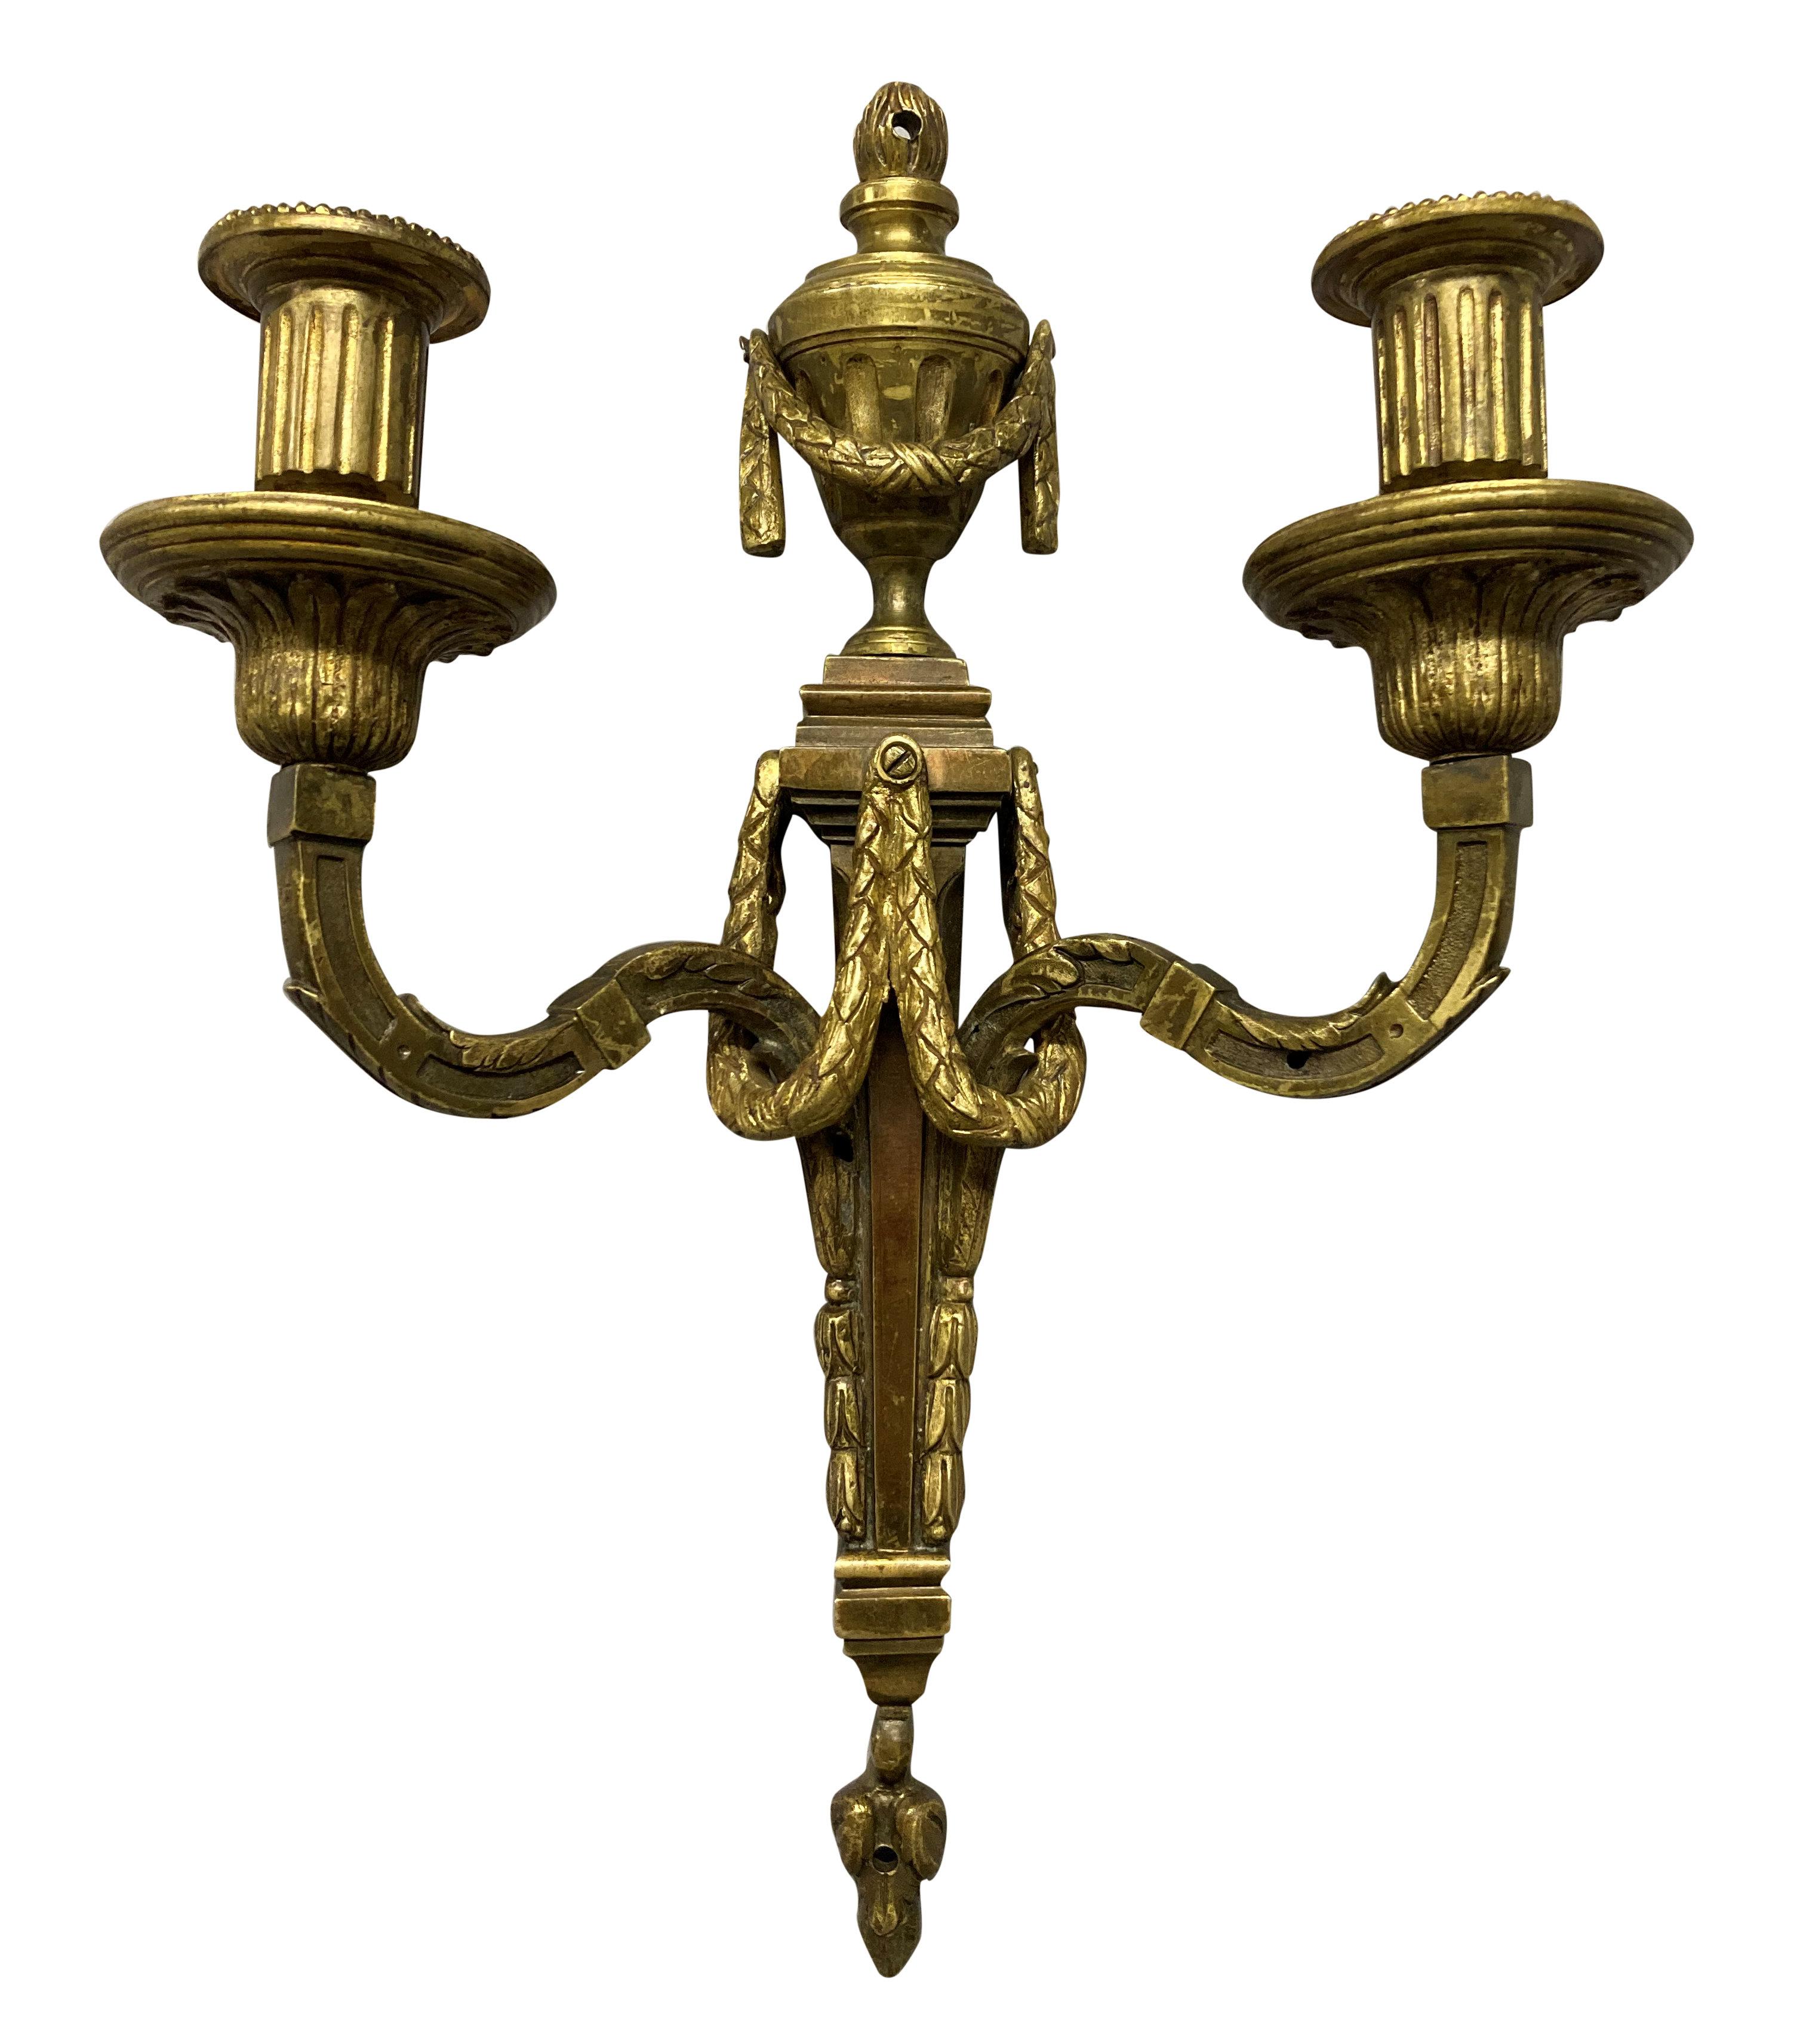 A pair of French Louis XVI style twin branch gilt bronze wall sconces, depicting urns and swags.